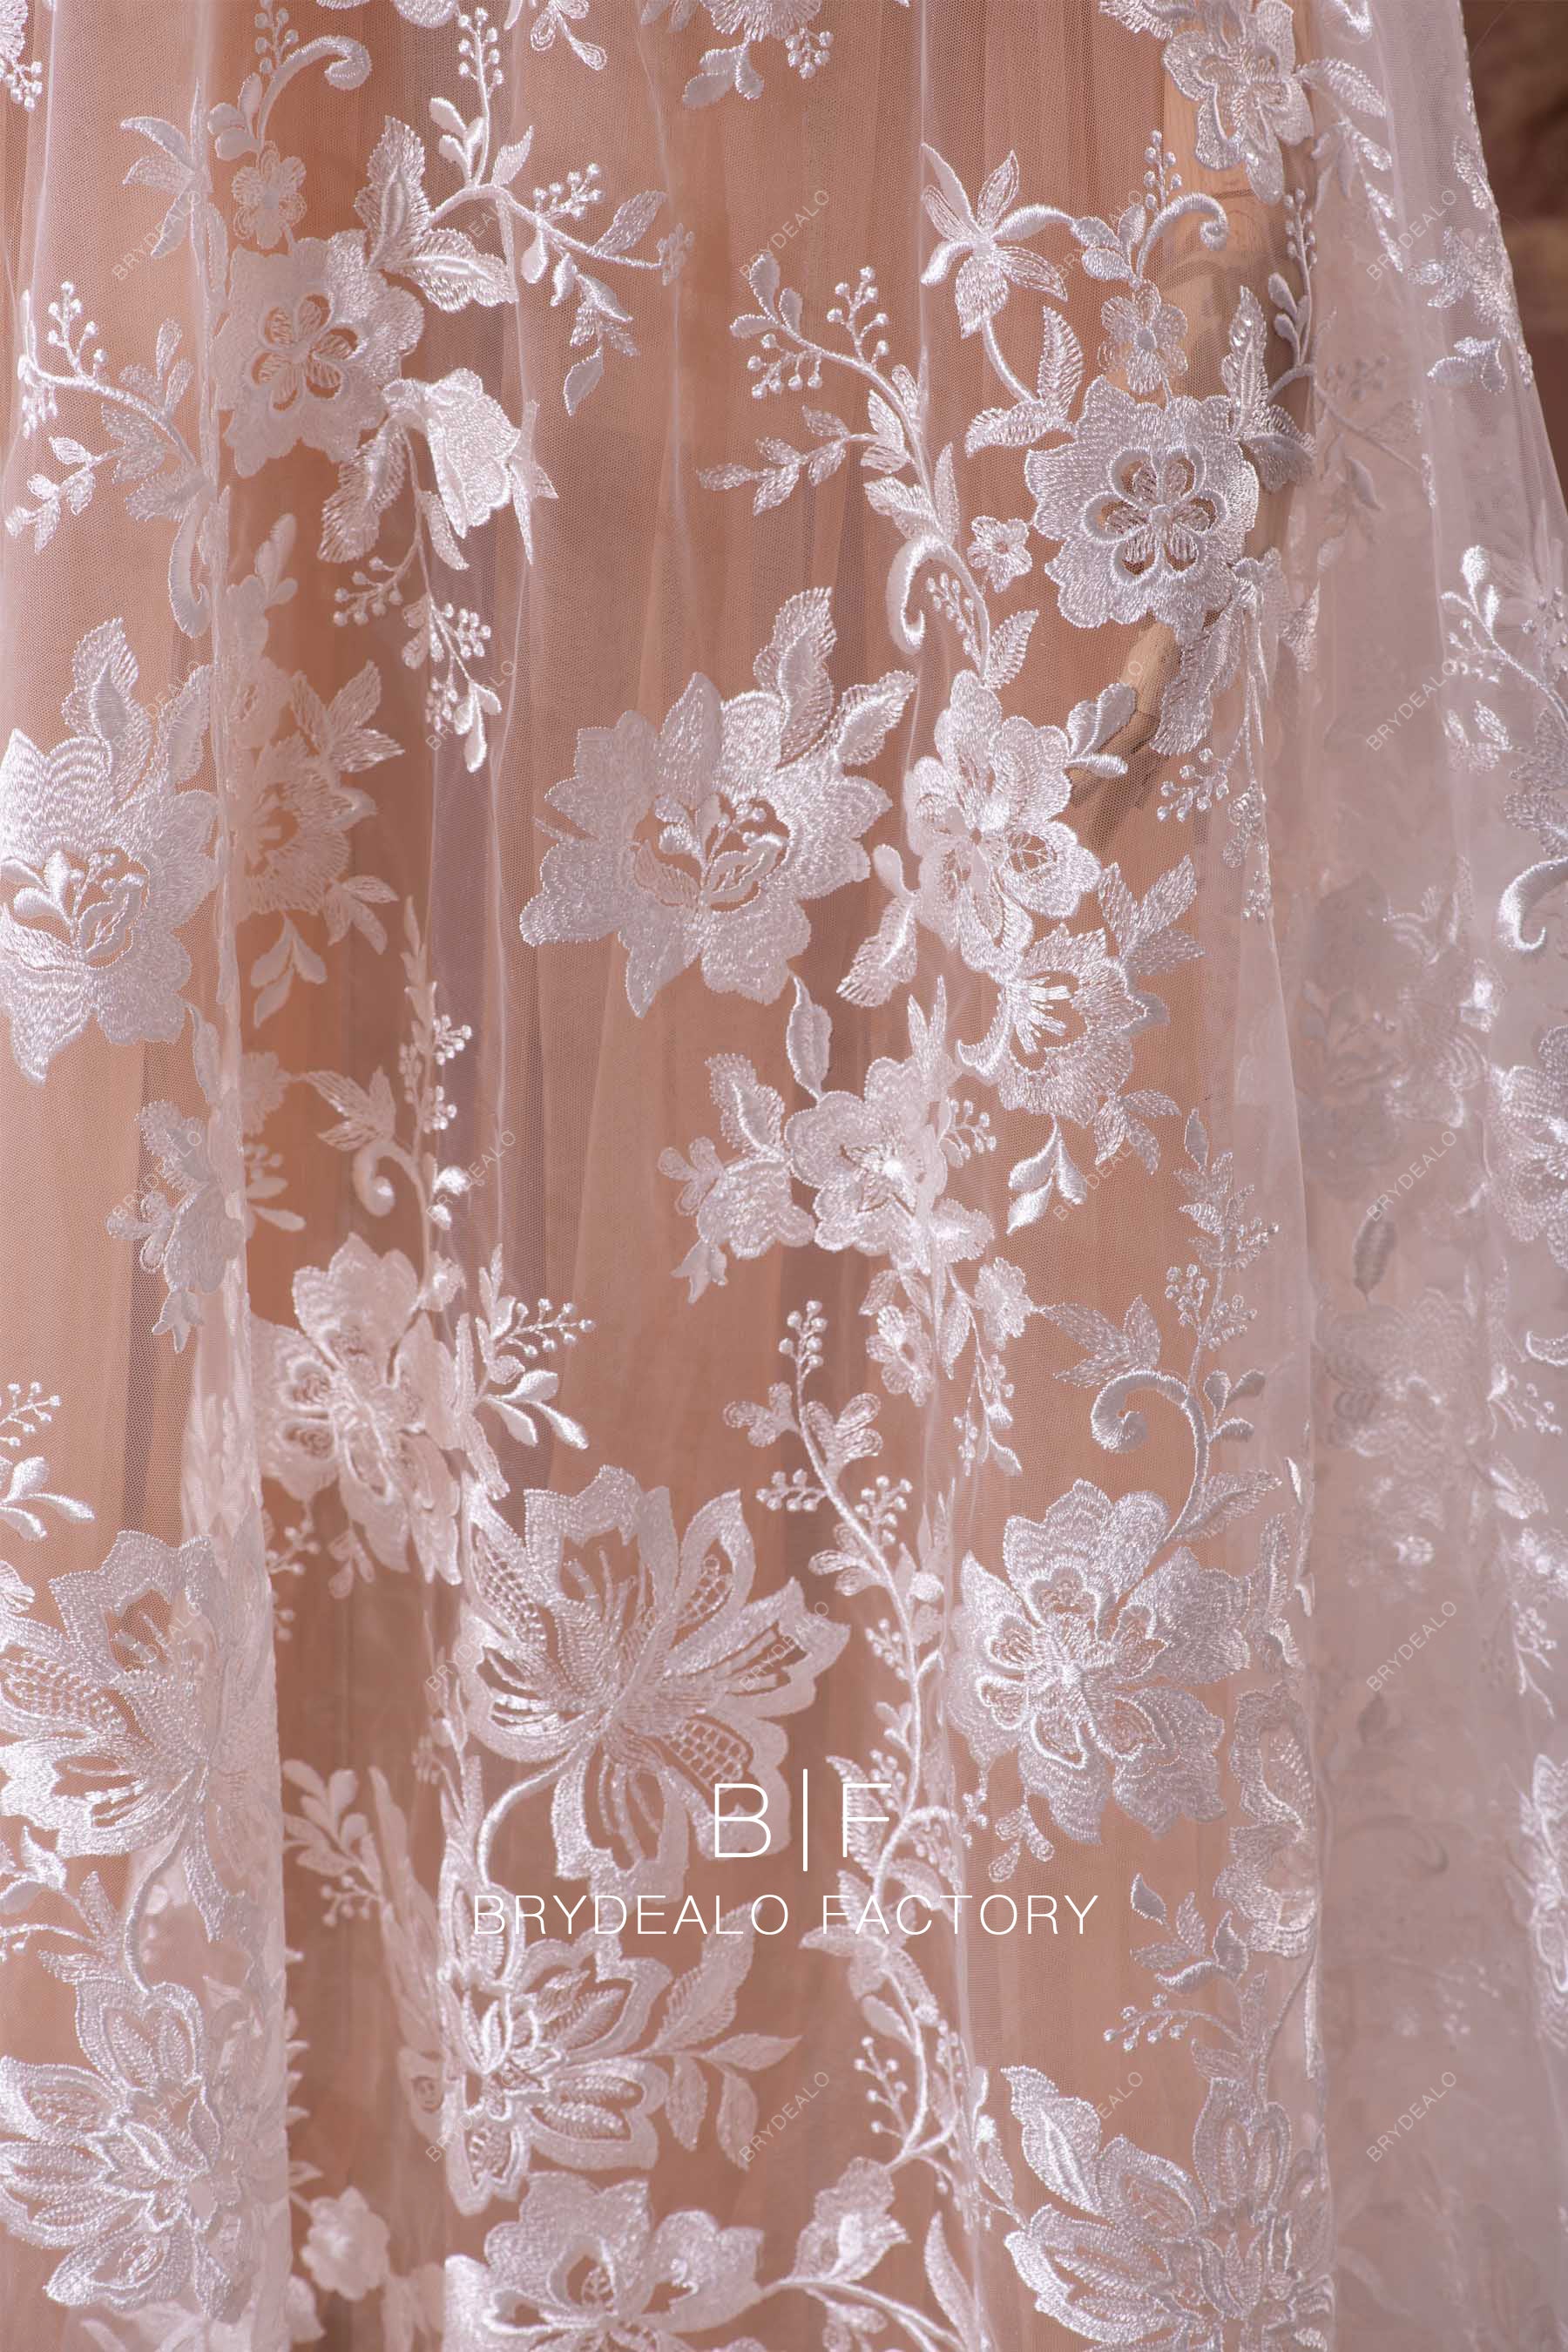 Romantic Embroidery Flower Lace Fabric Online